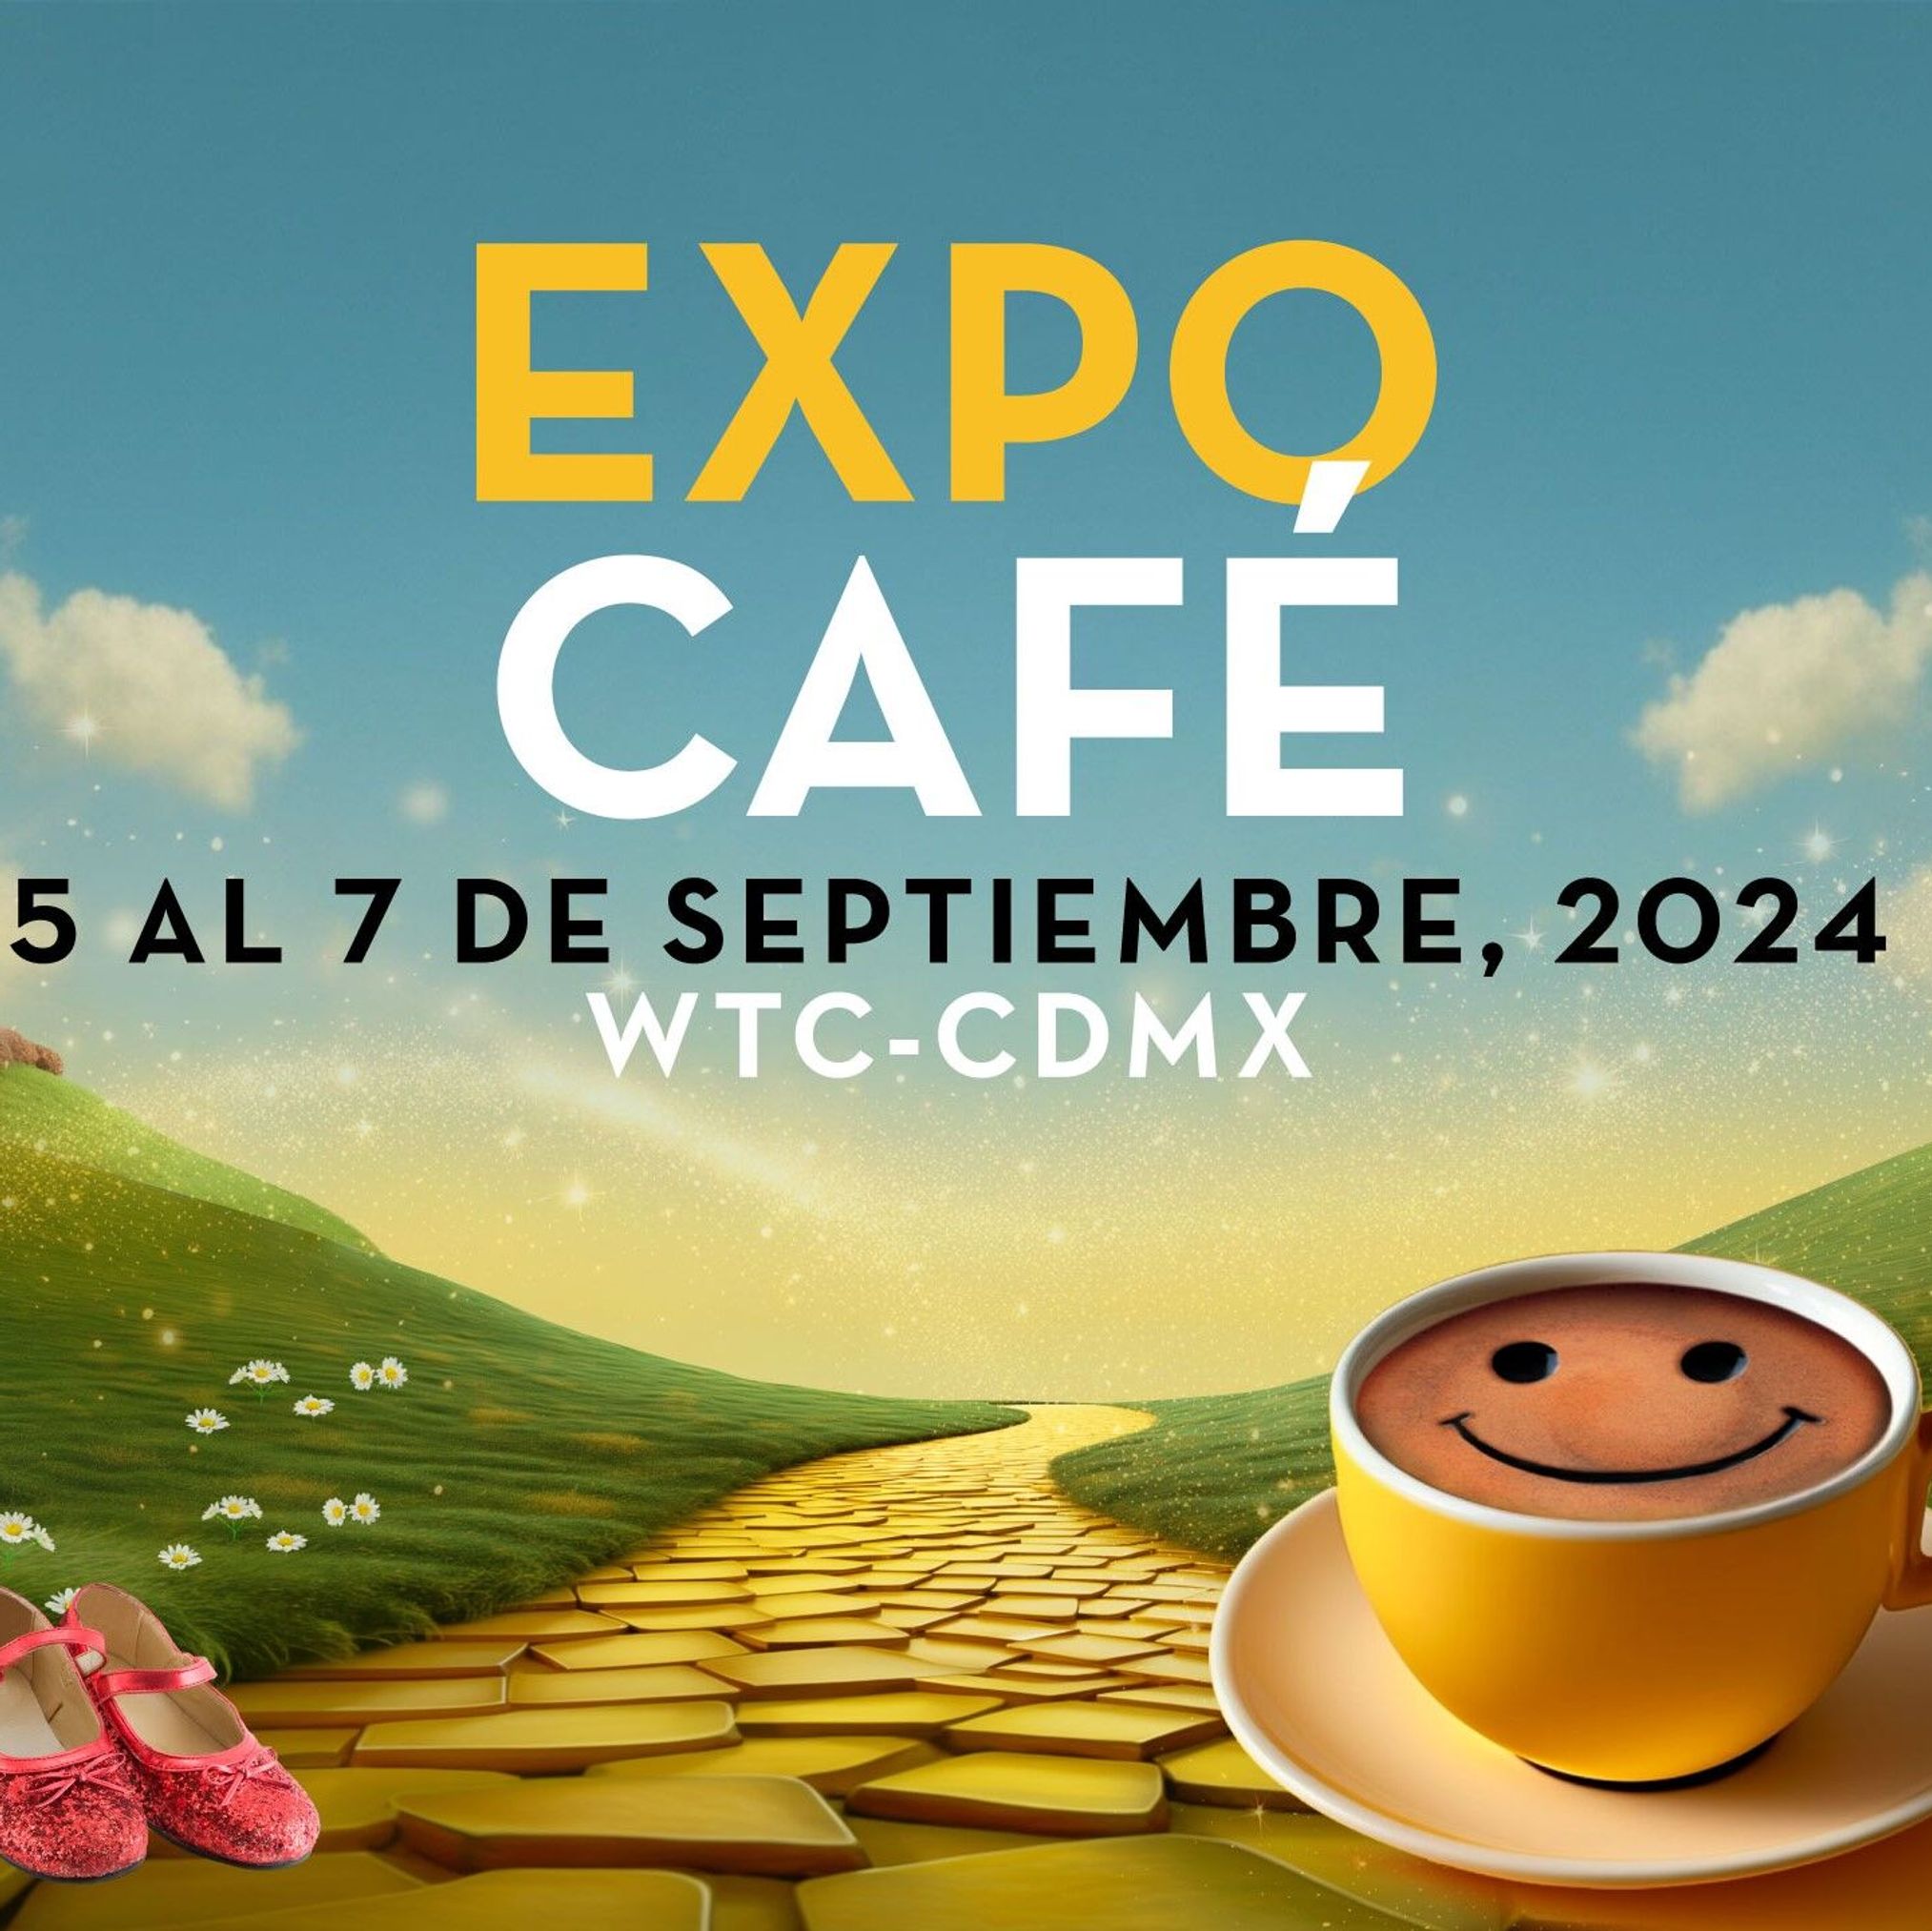 Expo cafe